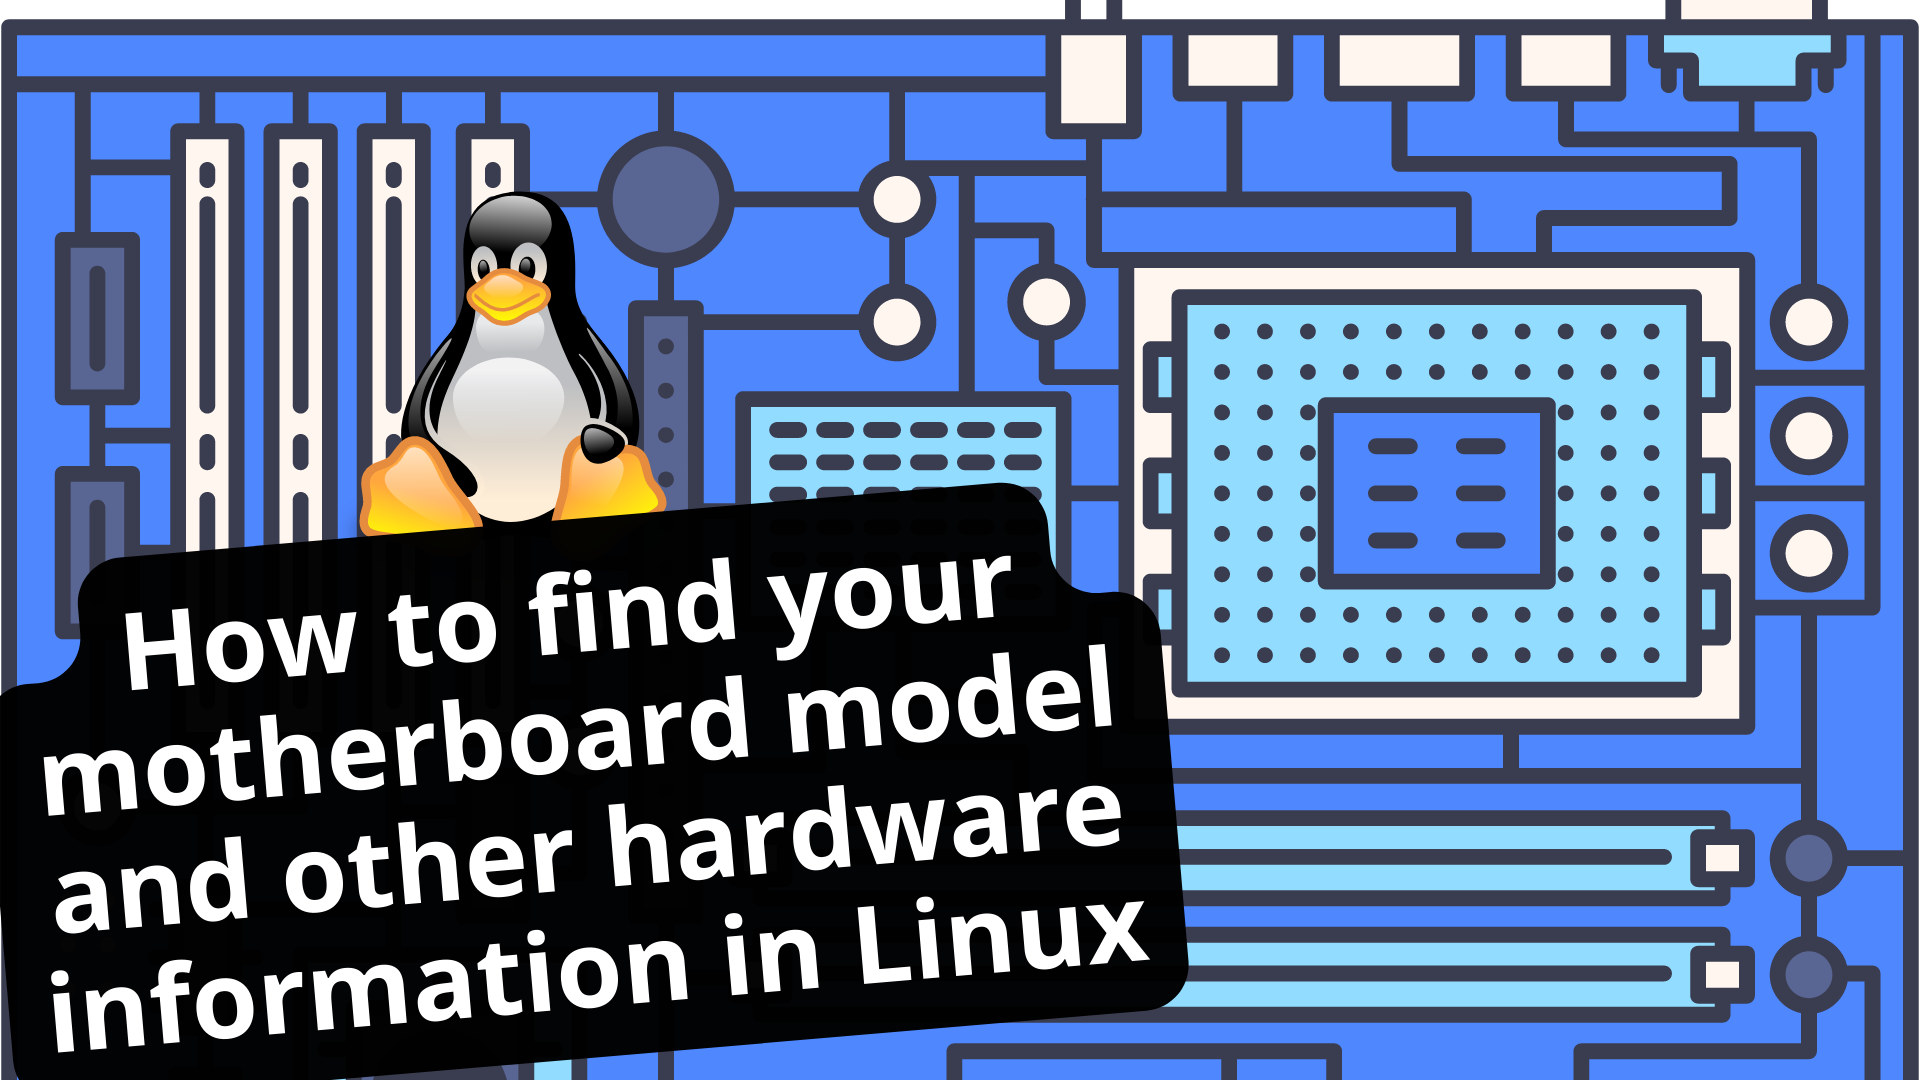 How to find your motherboard model and other hardware information in Linux